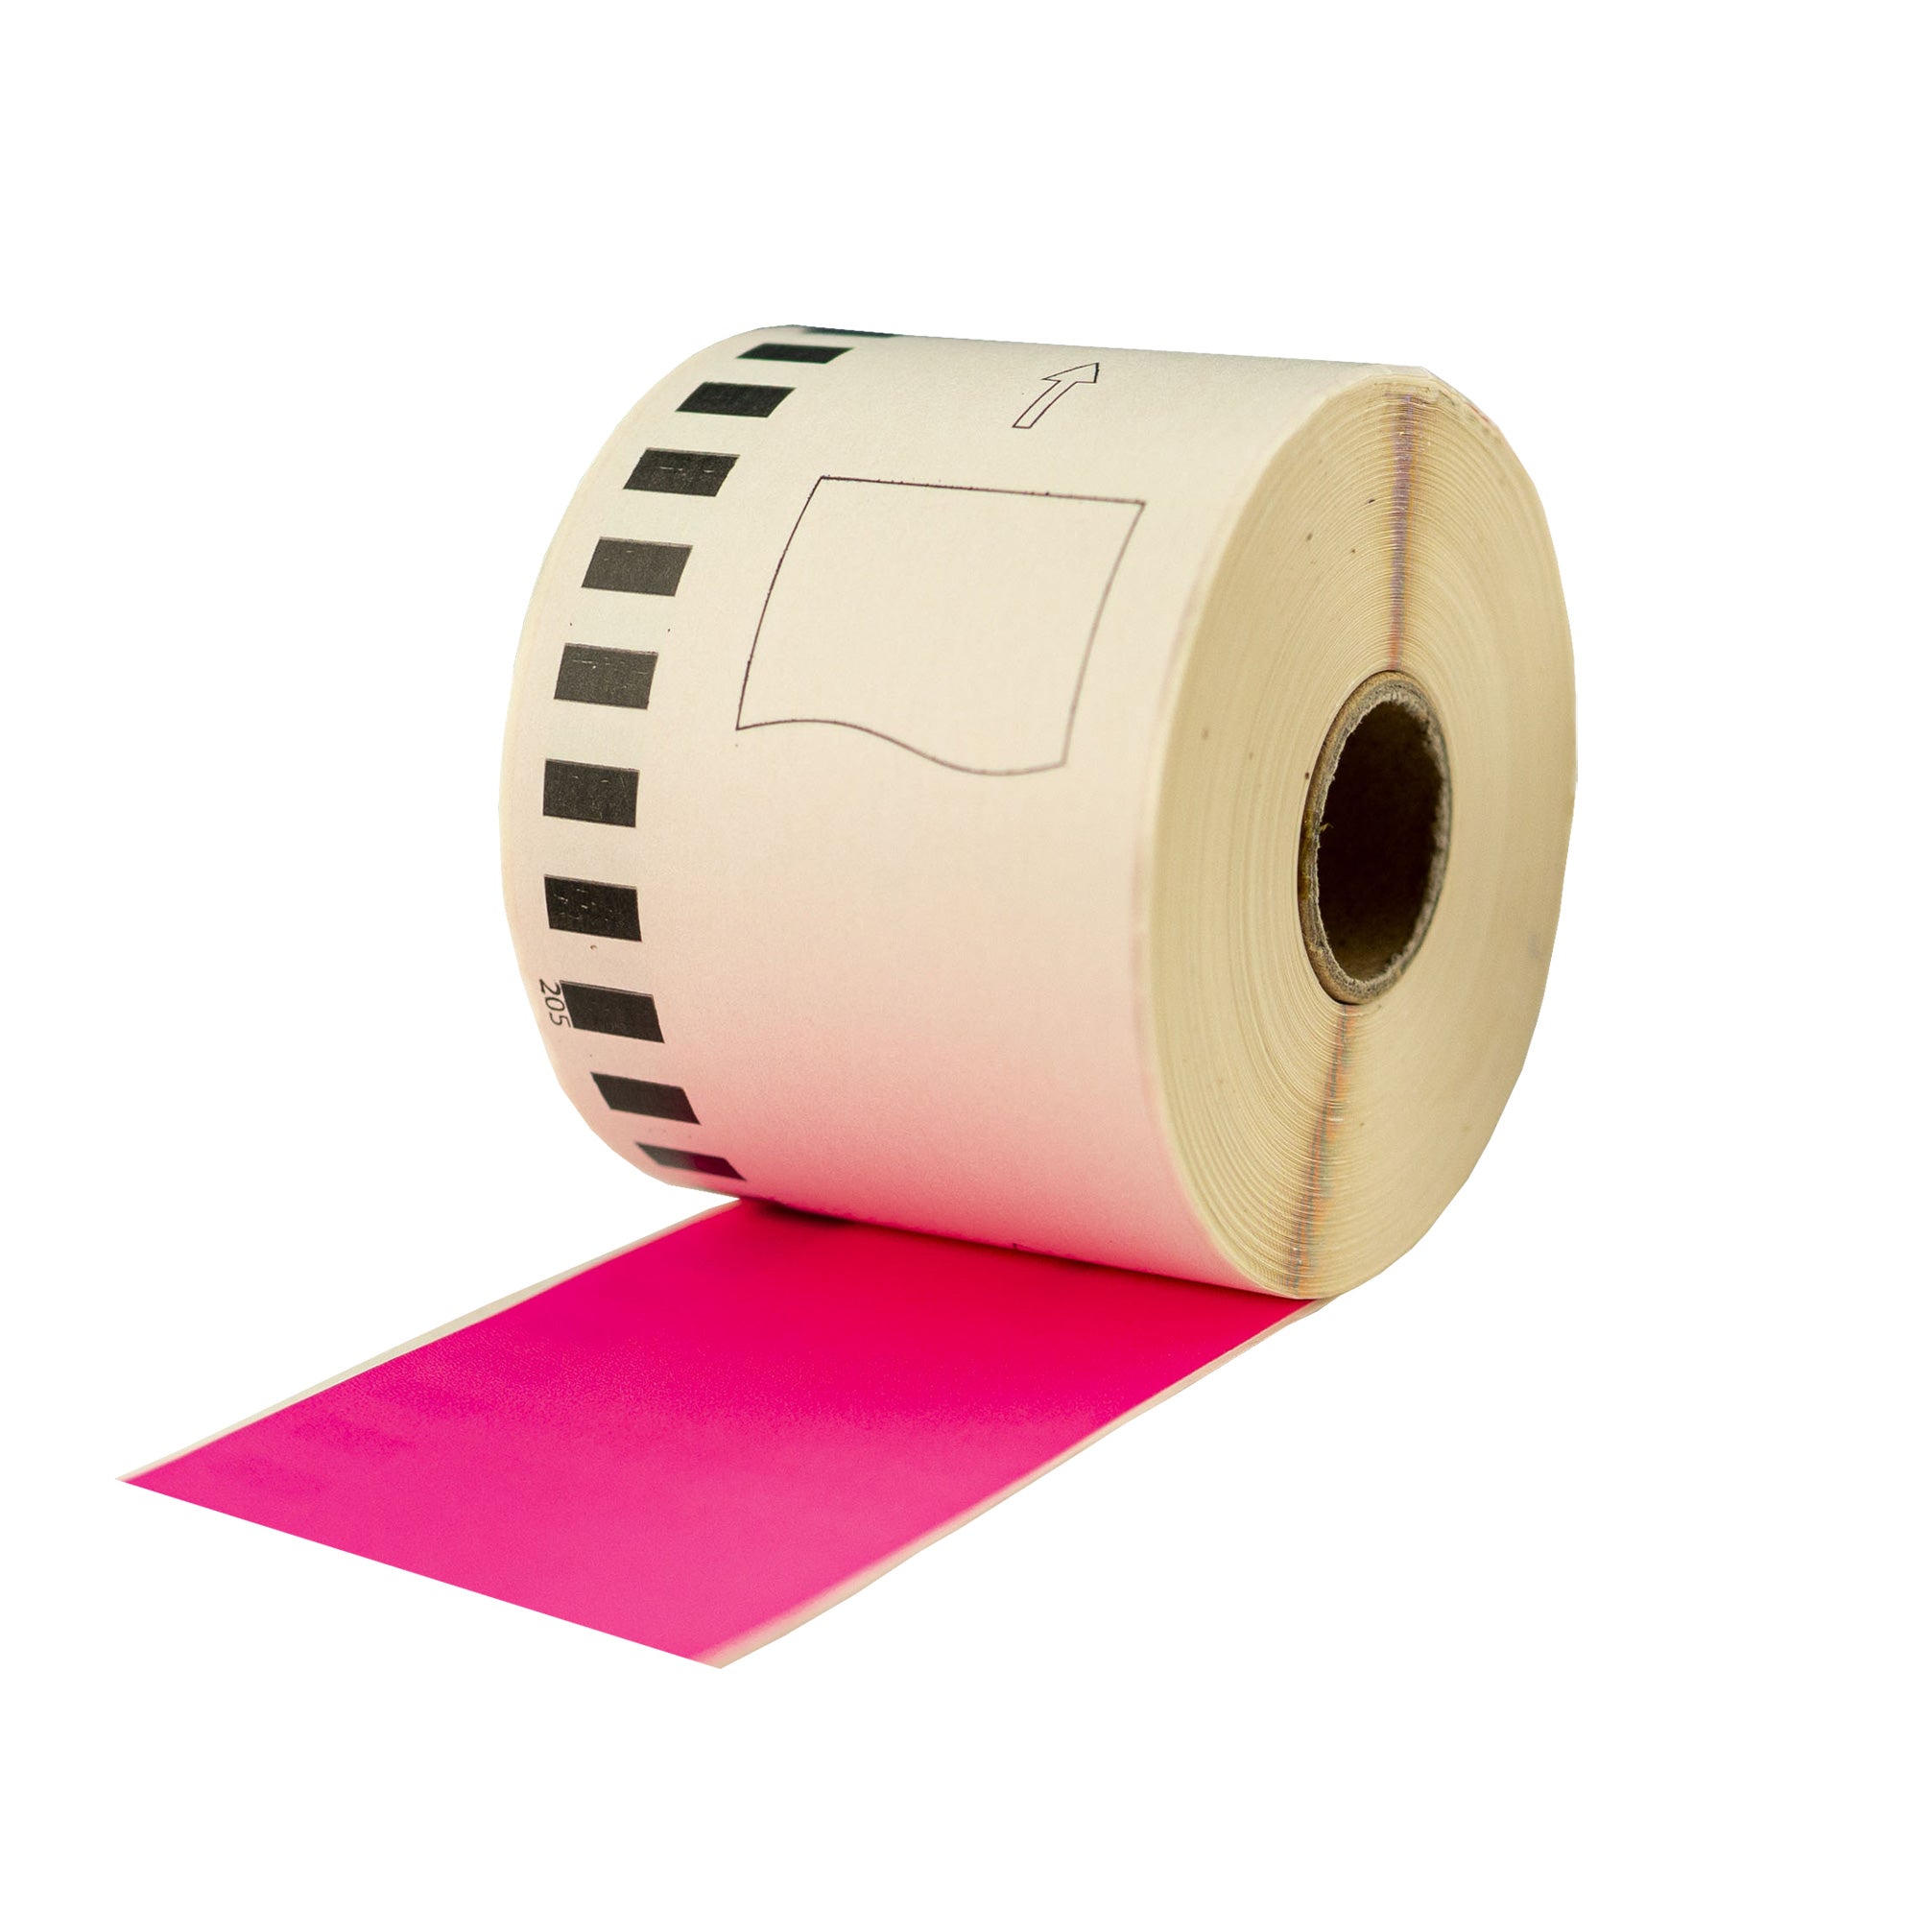 Compatible Brother DK-22205 Pink Refill Label Tapes 62mm x 30.4m/ 50 Rolls